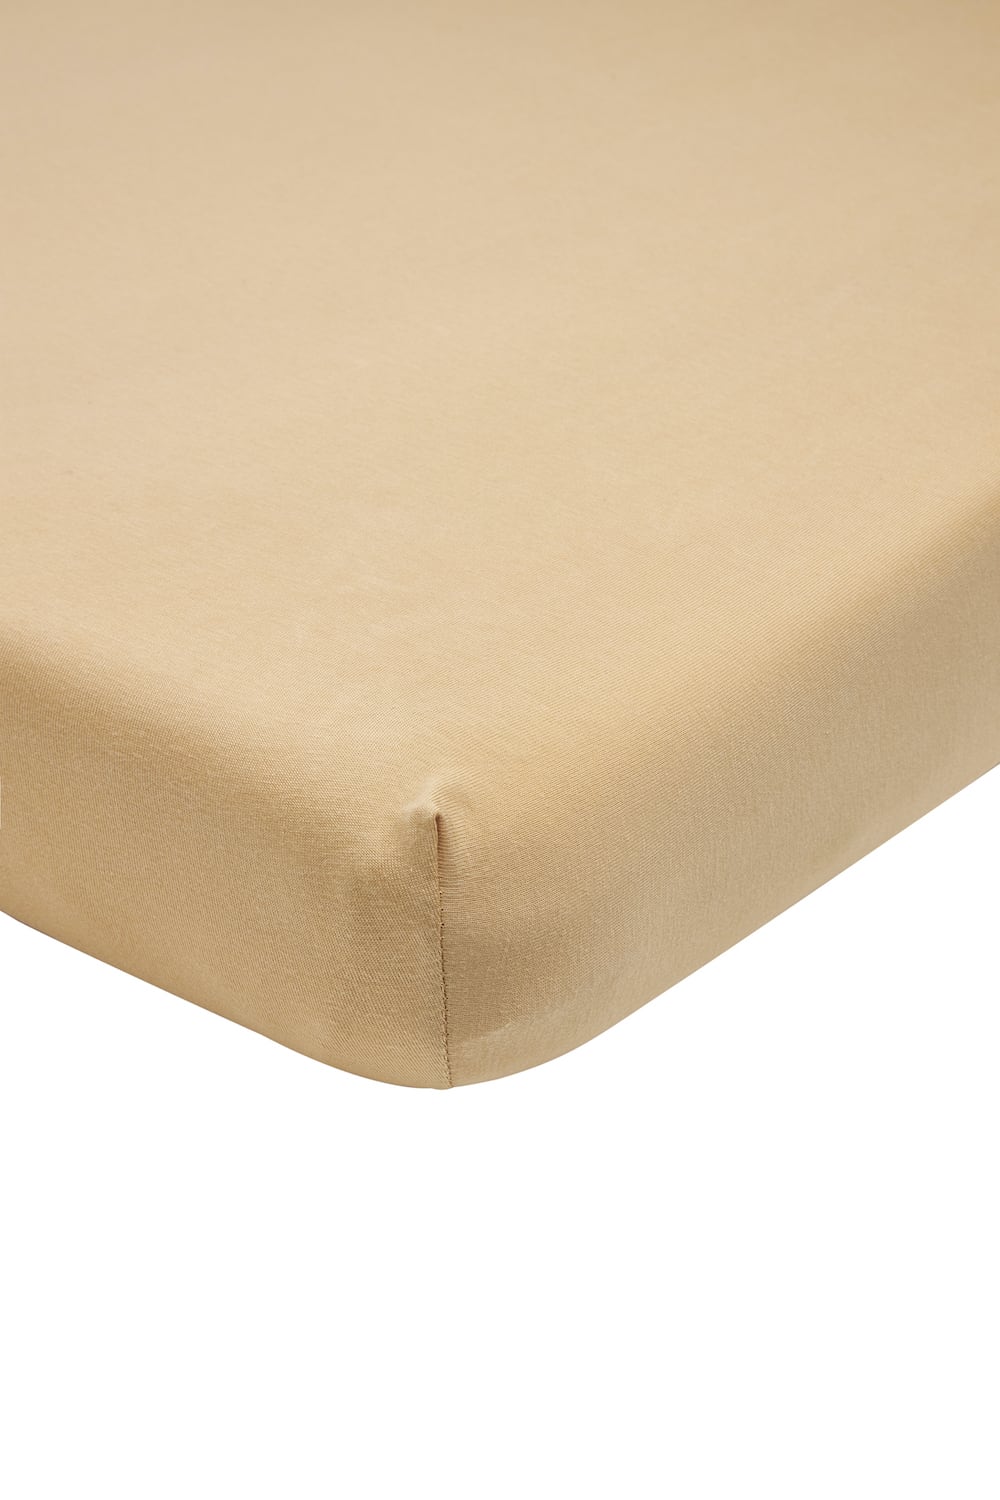 Hoeslaken 2-persoons Basic Jersey Warm Sand (140x200cm)